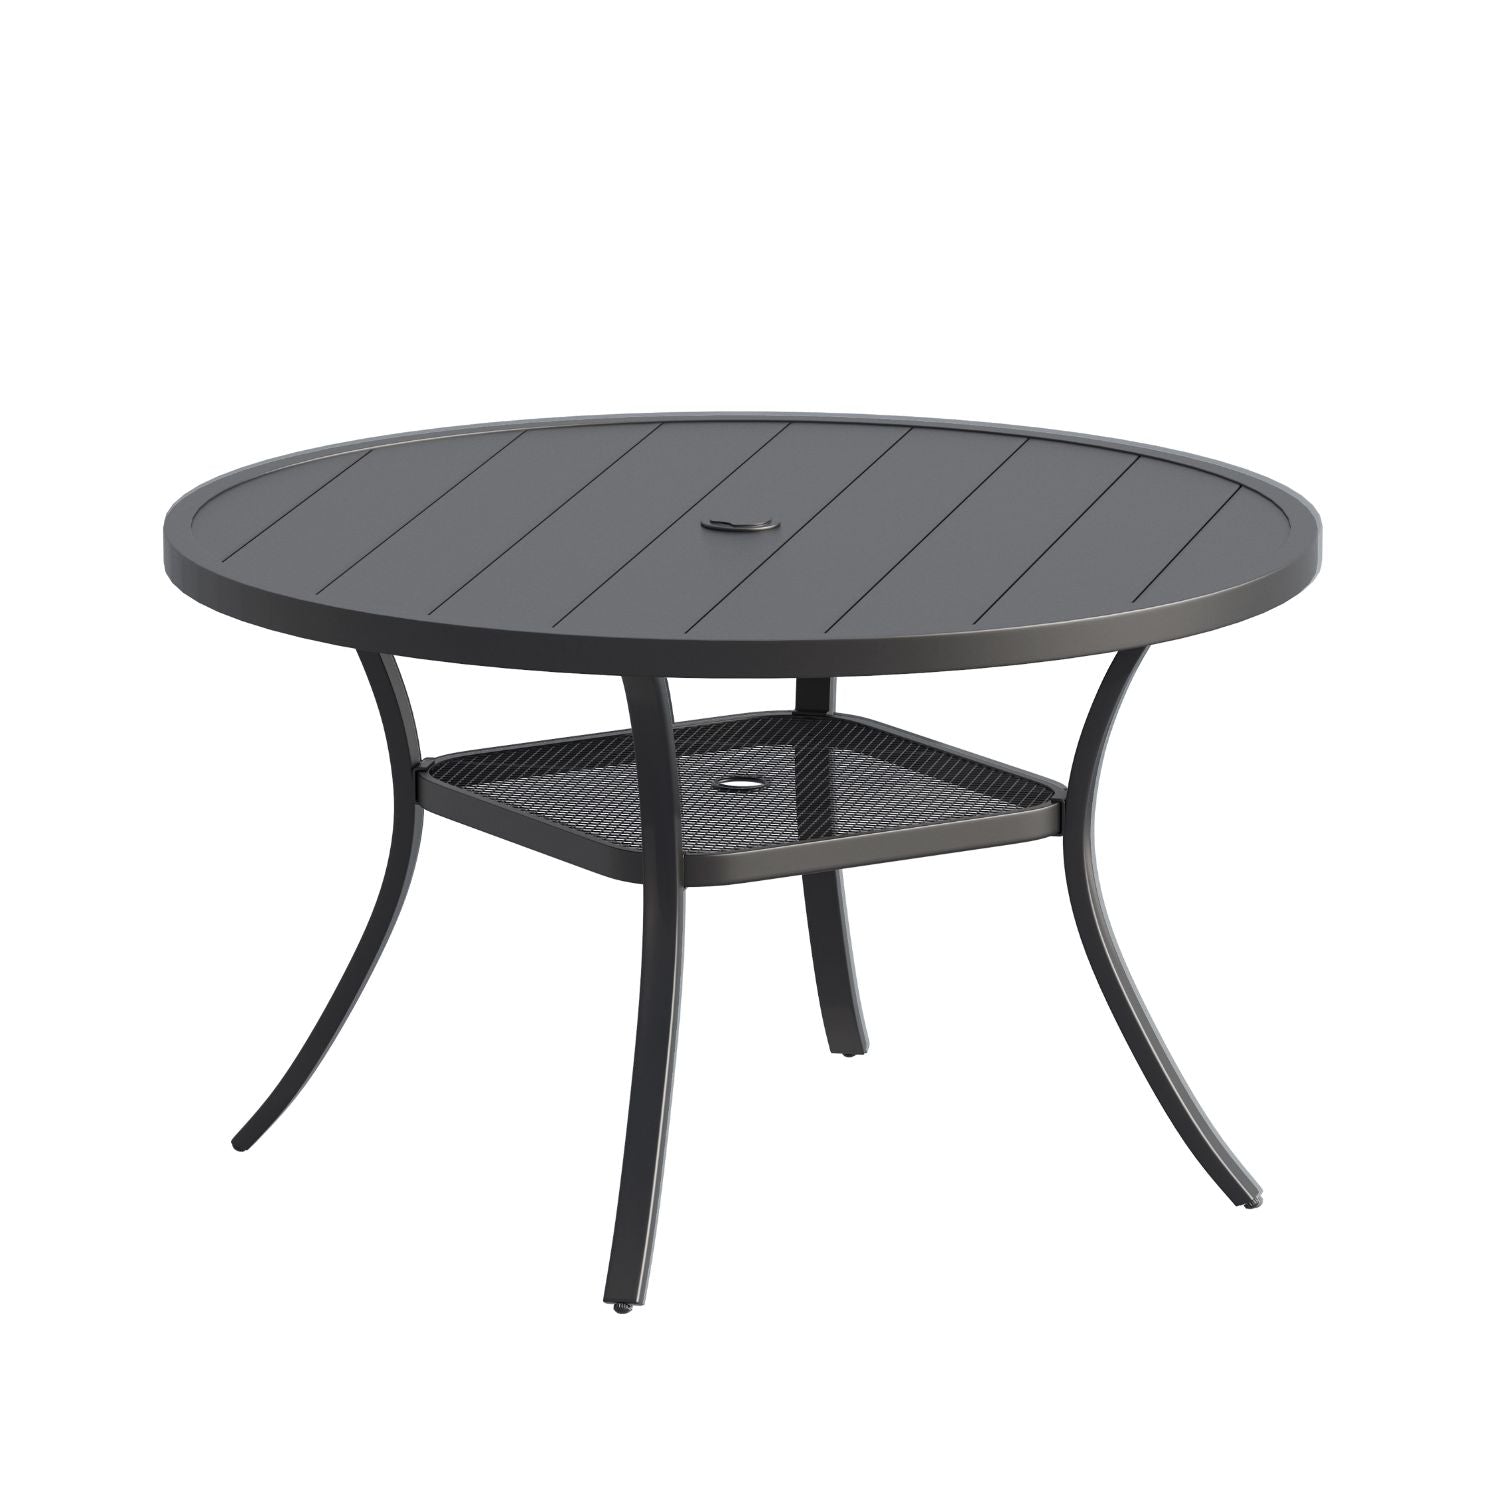 Vicllax 48" Outdoor Round Metal Dining Table with Umbrella Hole and Shelf